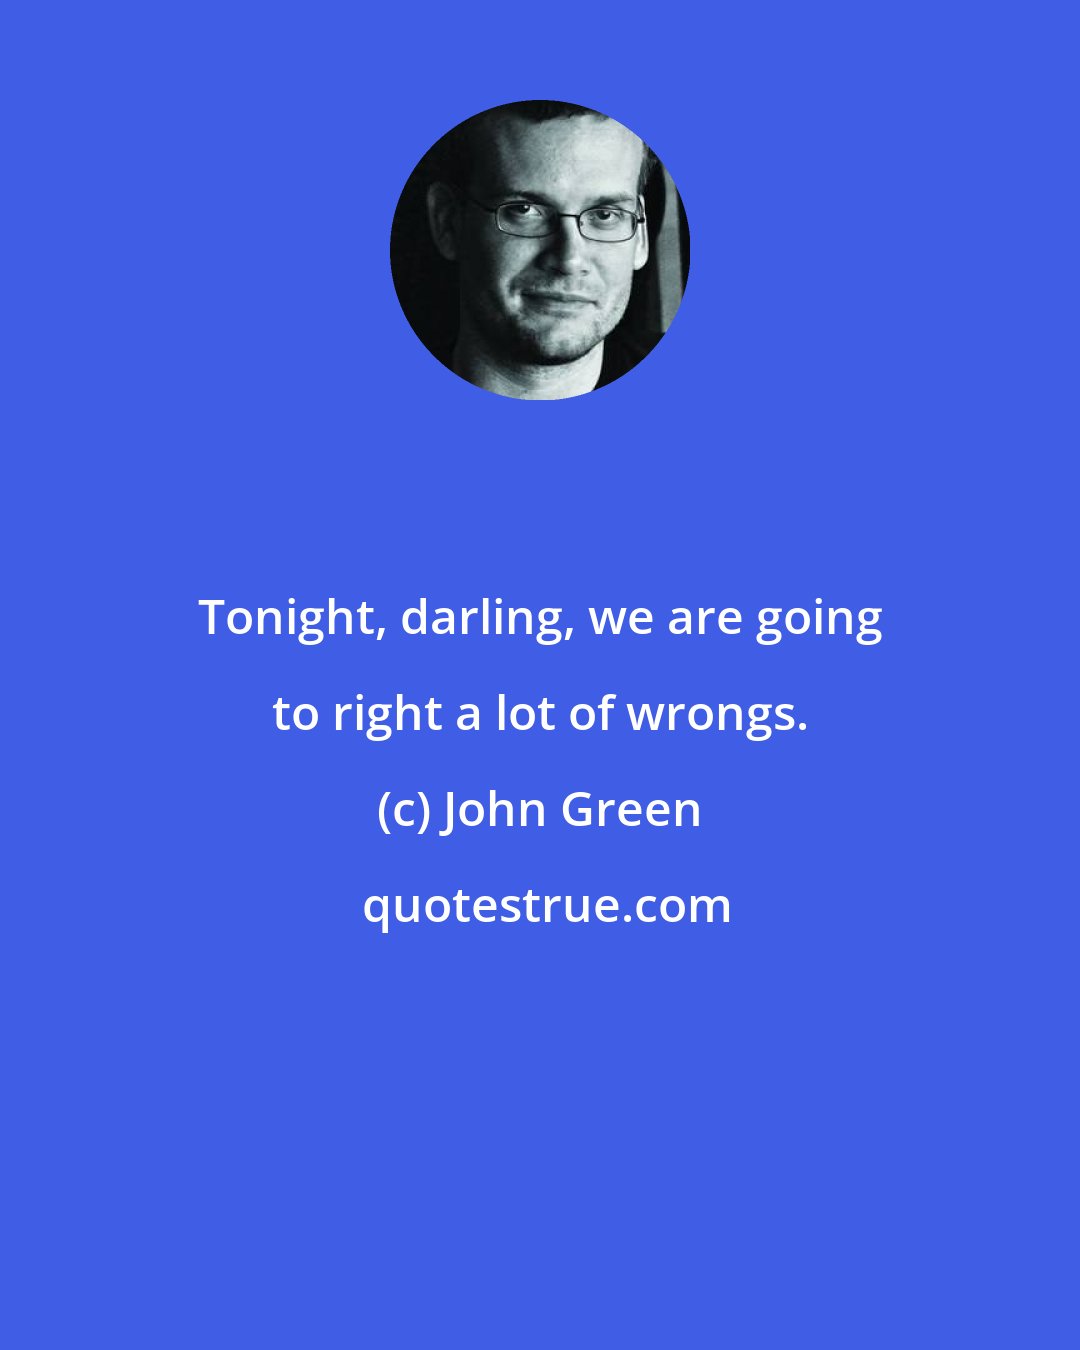 John Green: Tonight, darling, we are going to right a lot of wrongs.